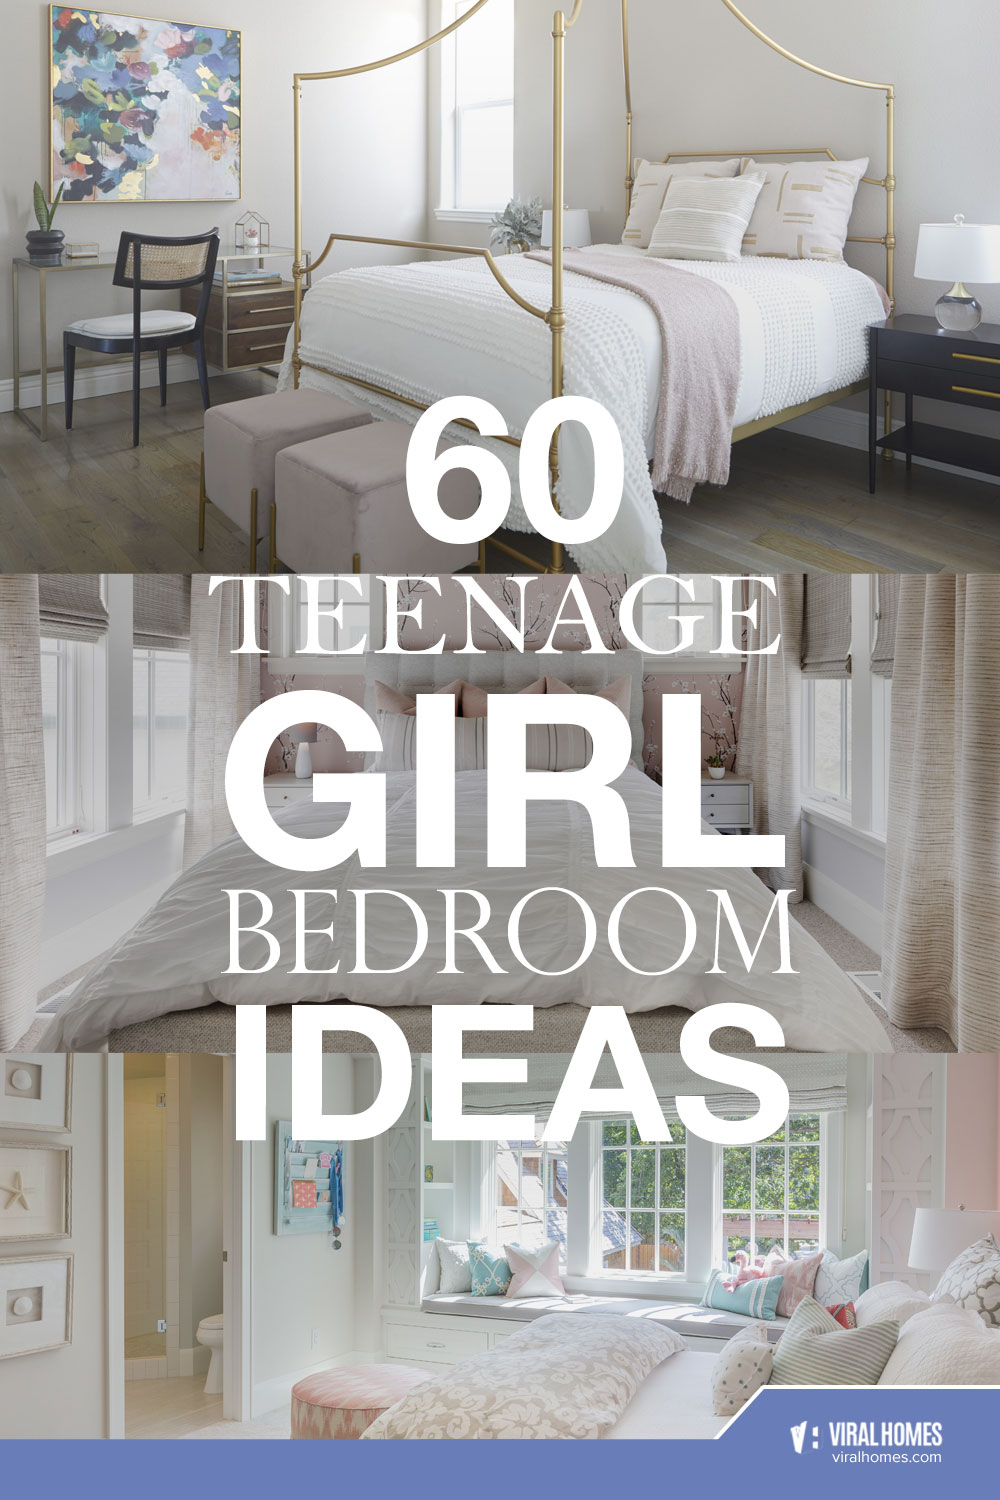 Teenage Girl Bedroom Ideas for the Young Adult